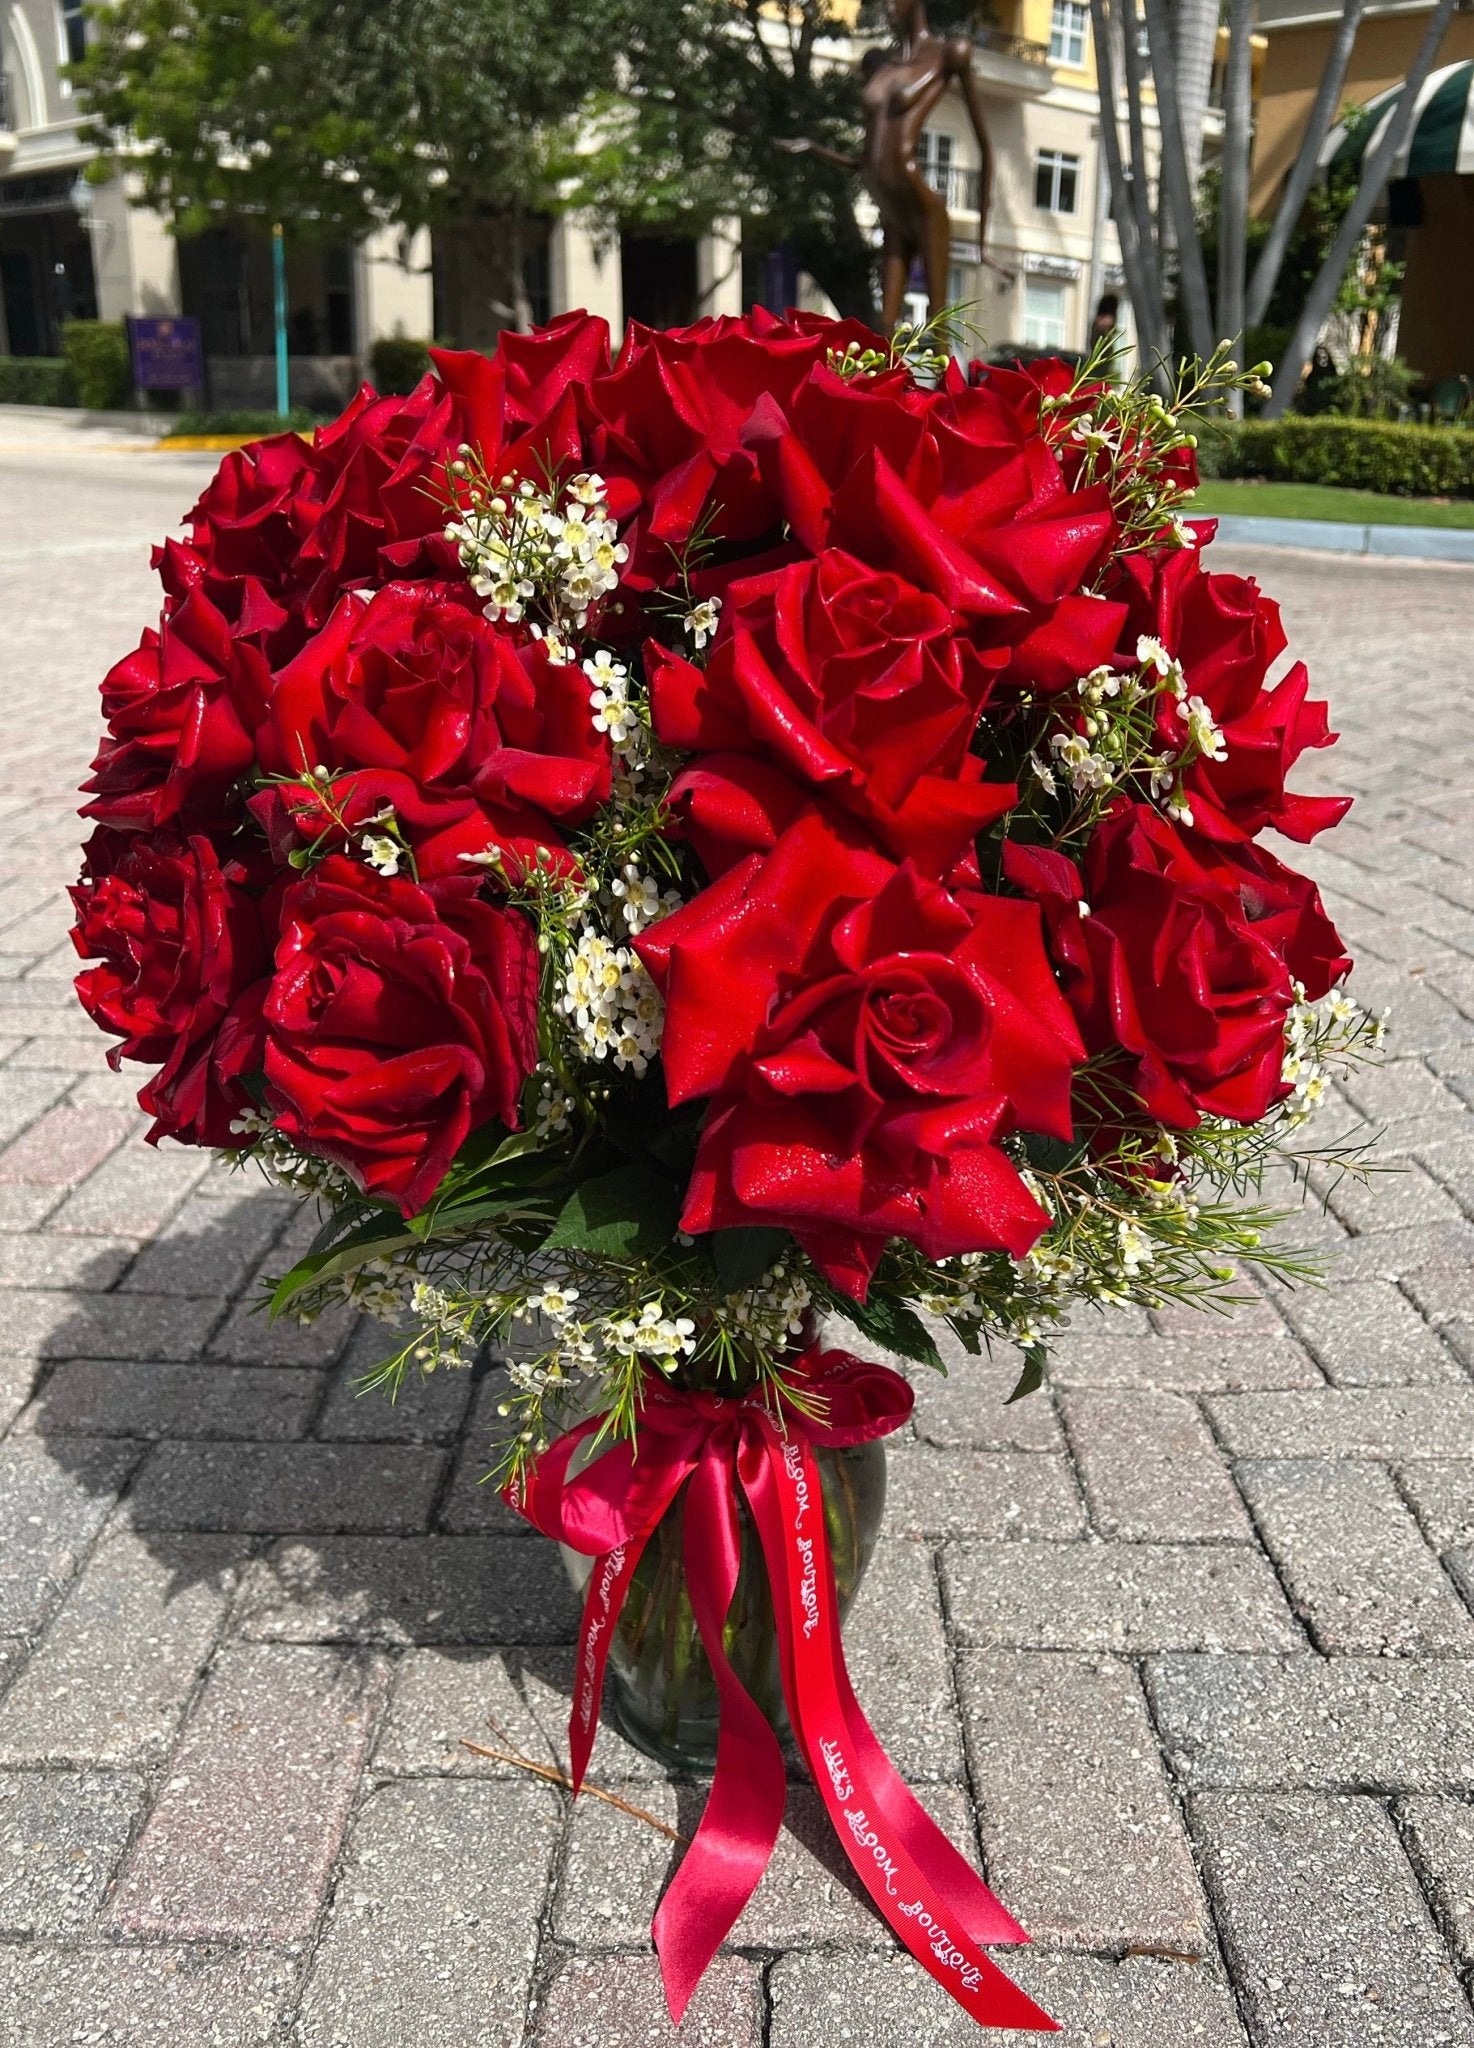 2 Dozen Red Roses in a Vase - Lily's Bloom Boutique